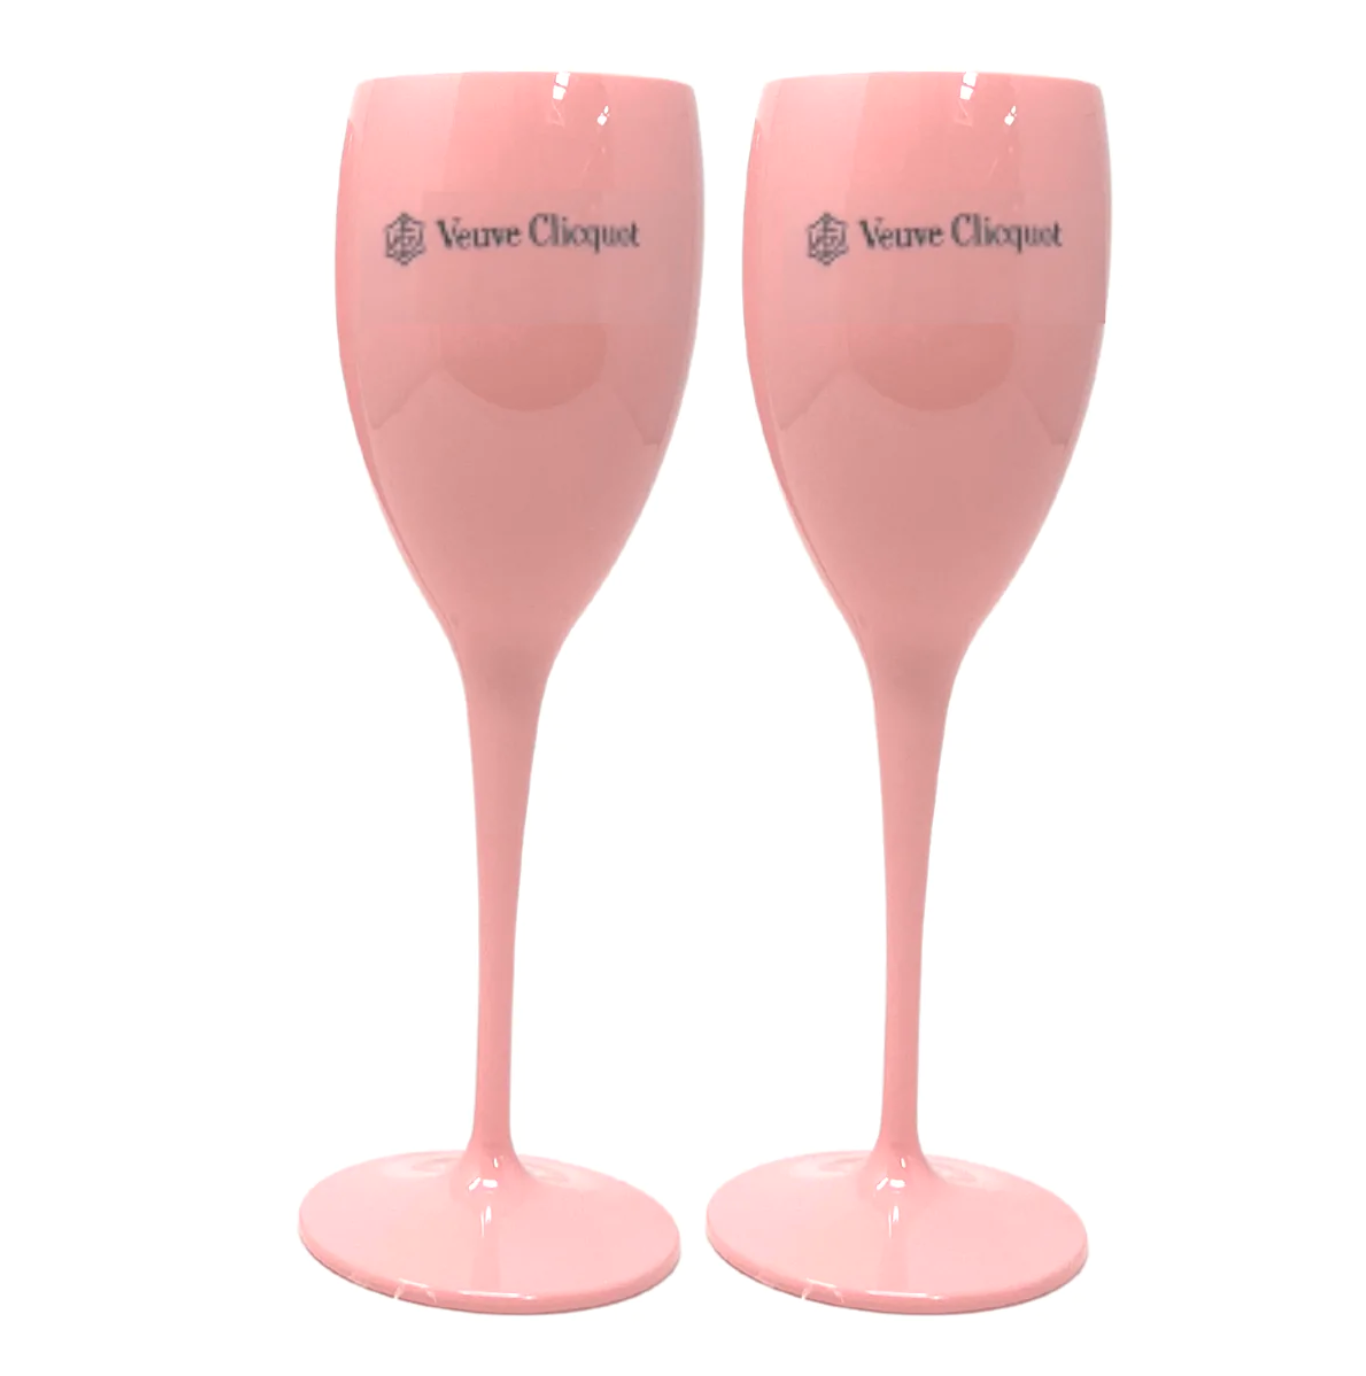 Tart by Taylor Pink Champagne Flute